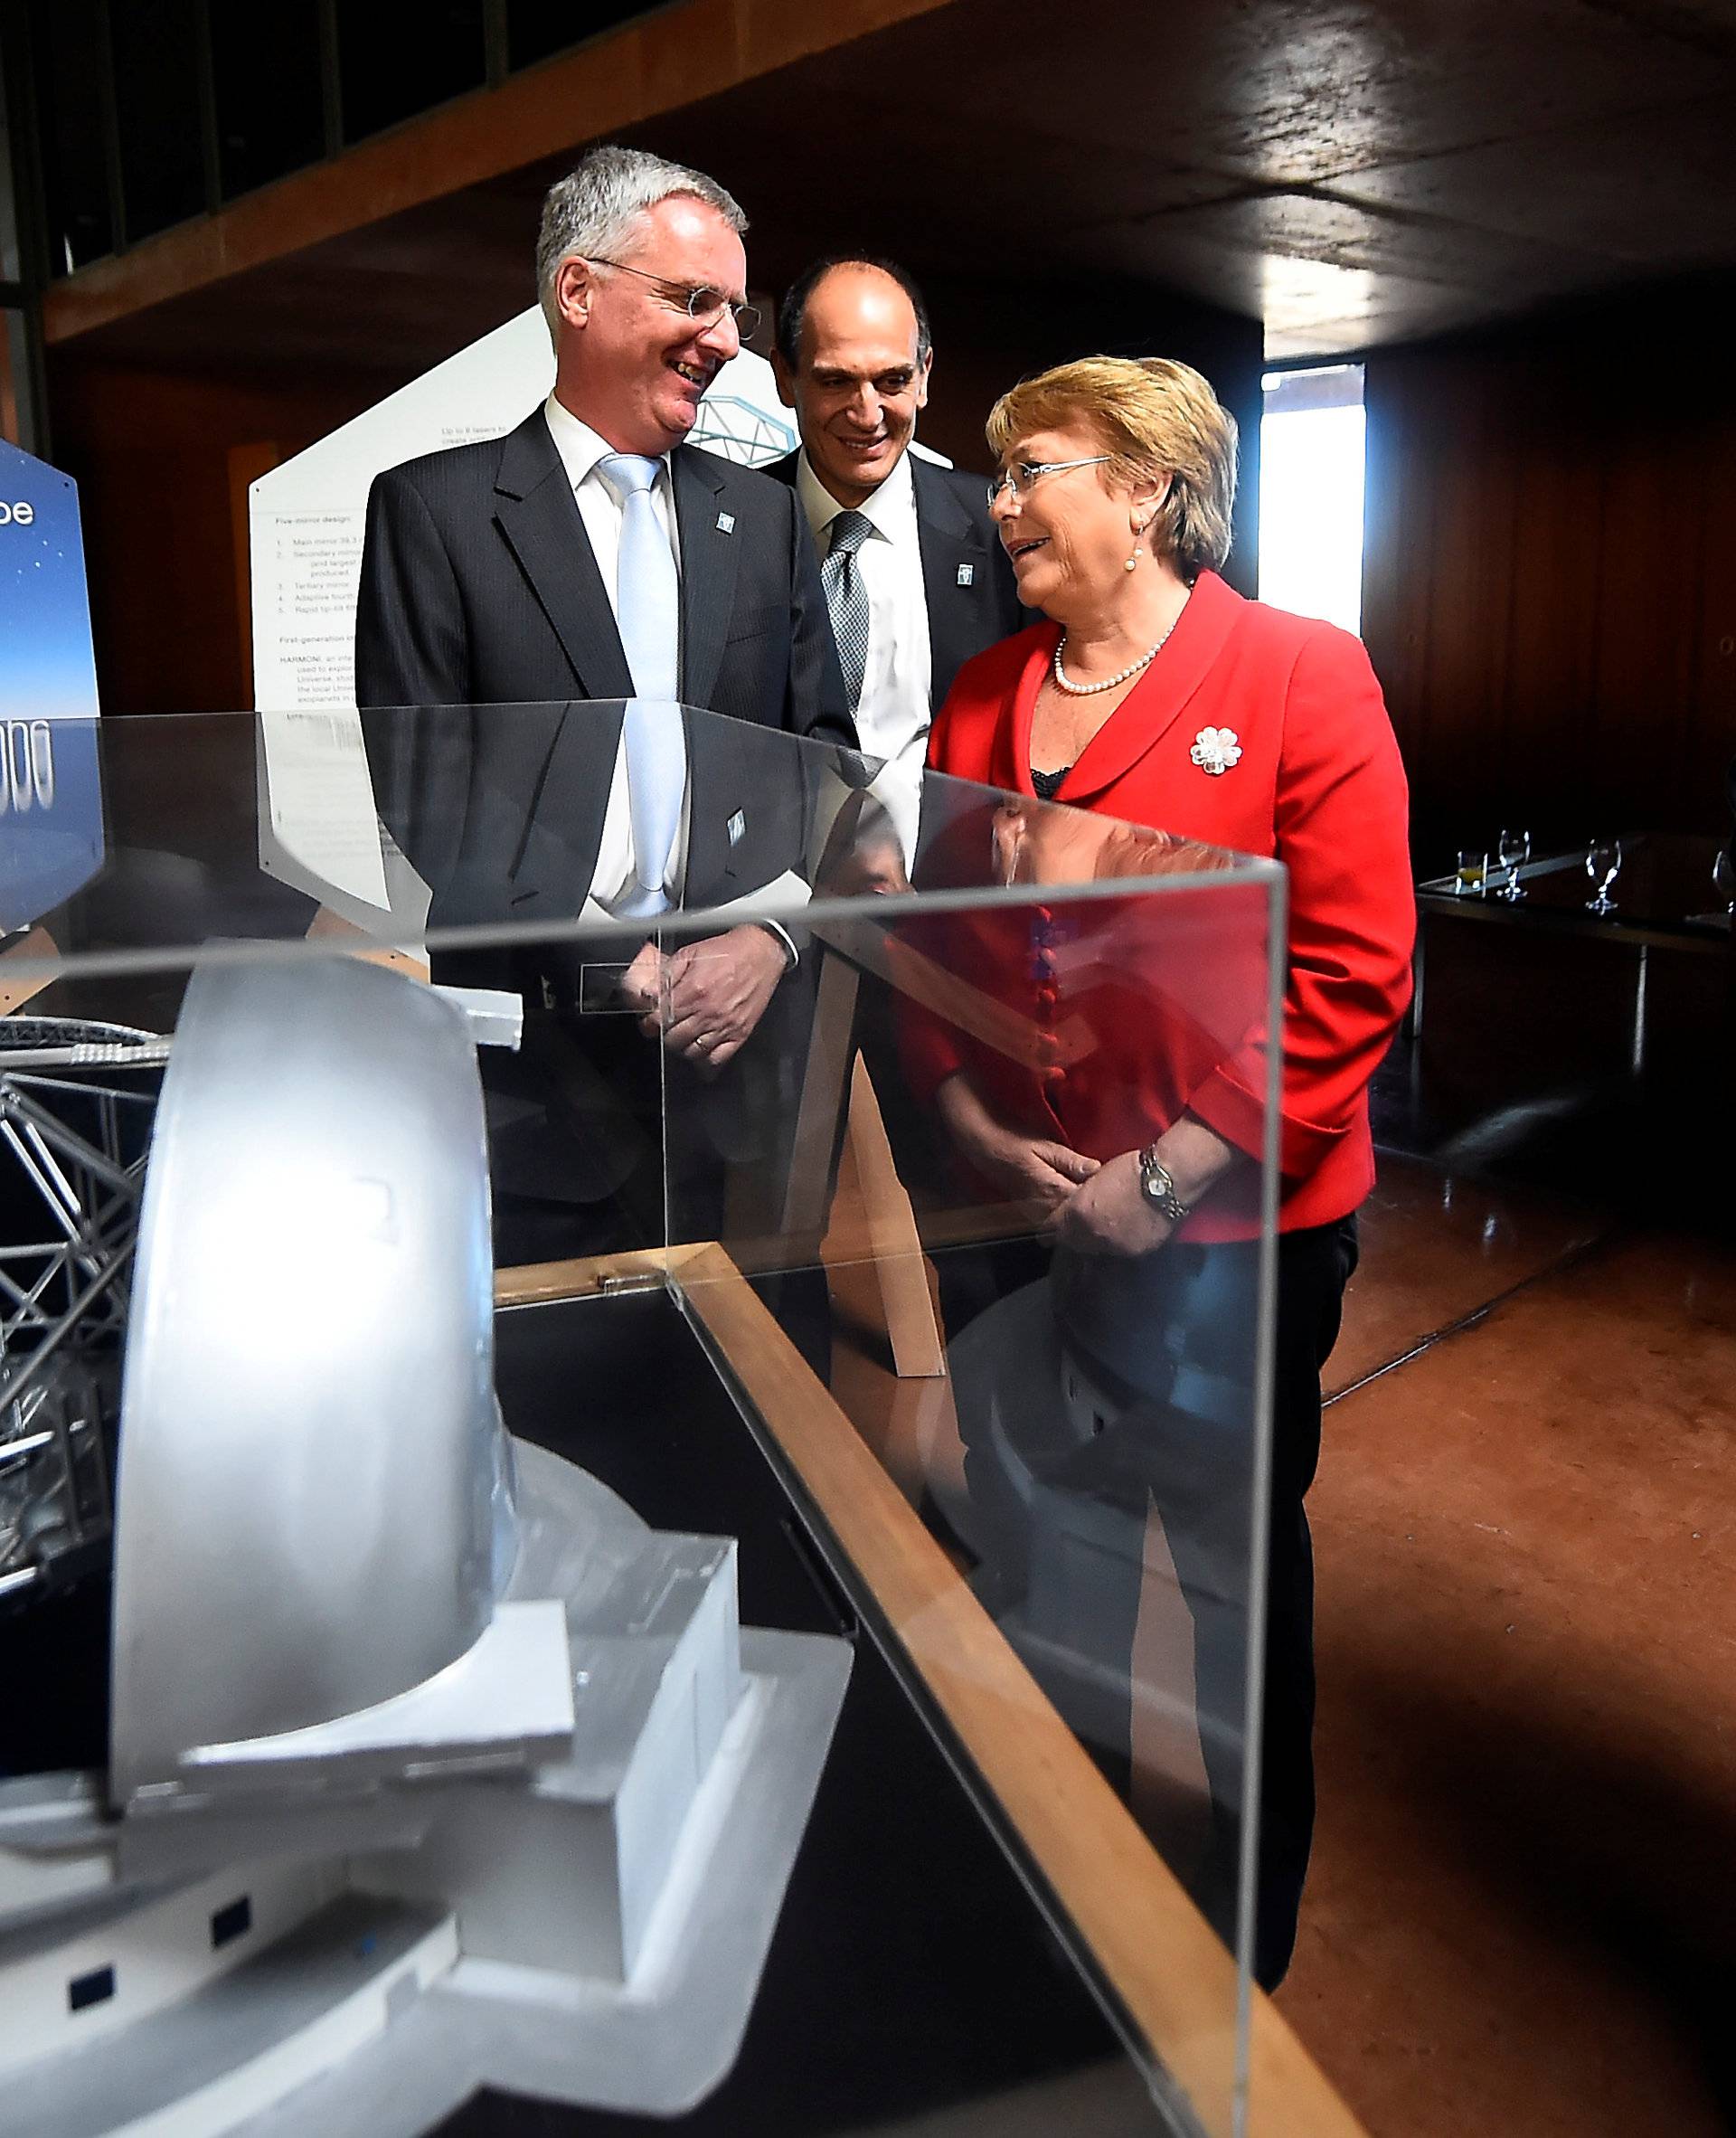 Chile's President Bachelet and Director General of the European Southern Observatory De Zeeuw are seen next to a scale model of the world's largest telescope